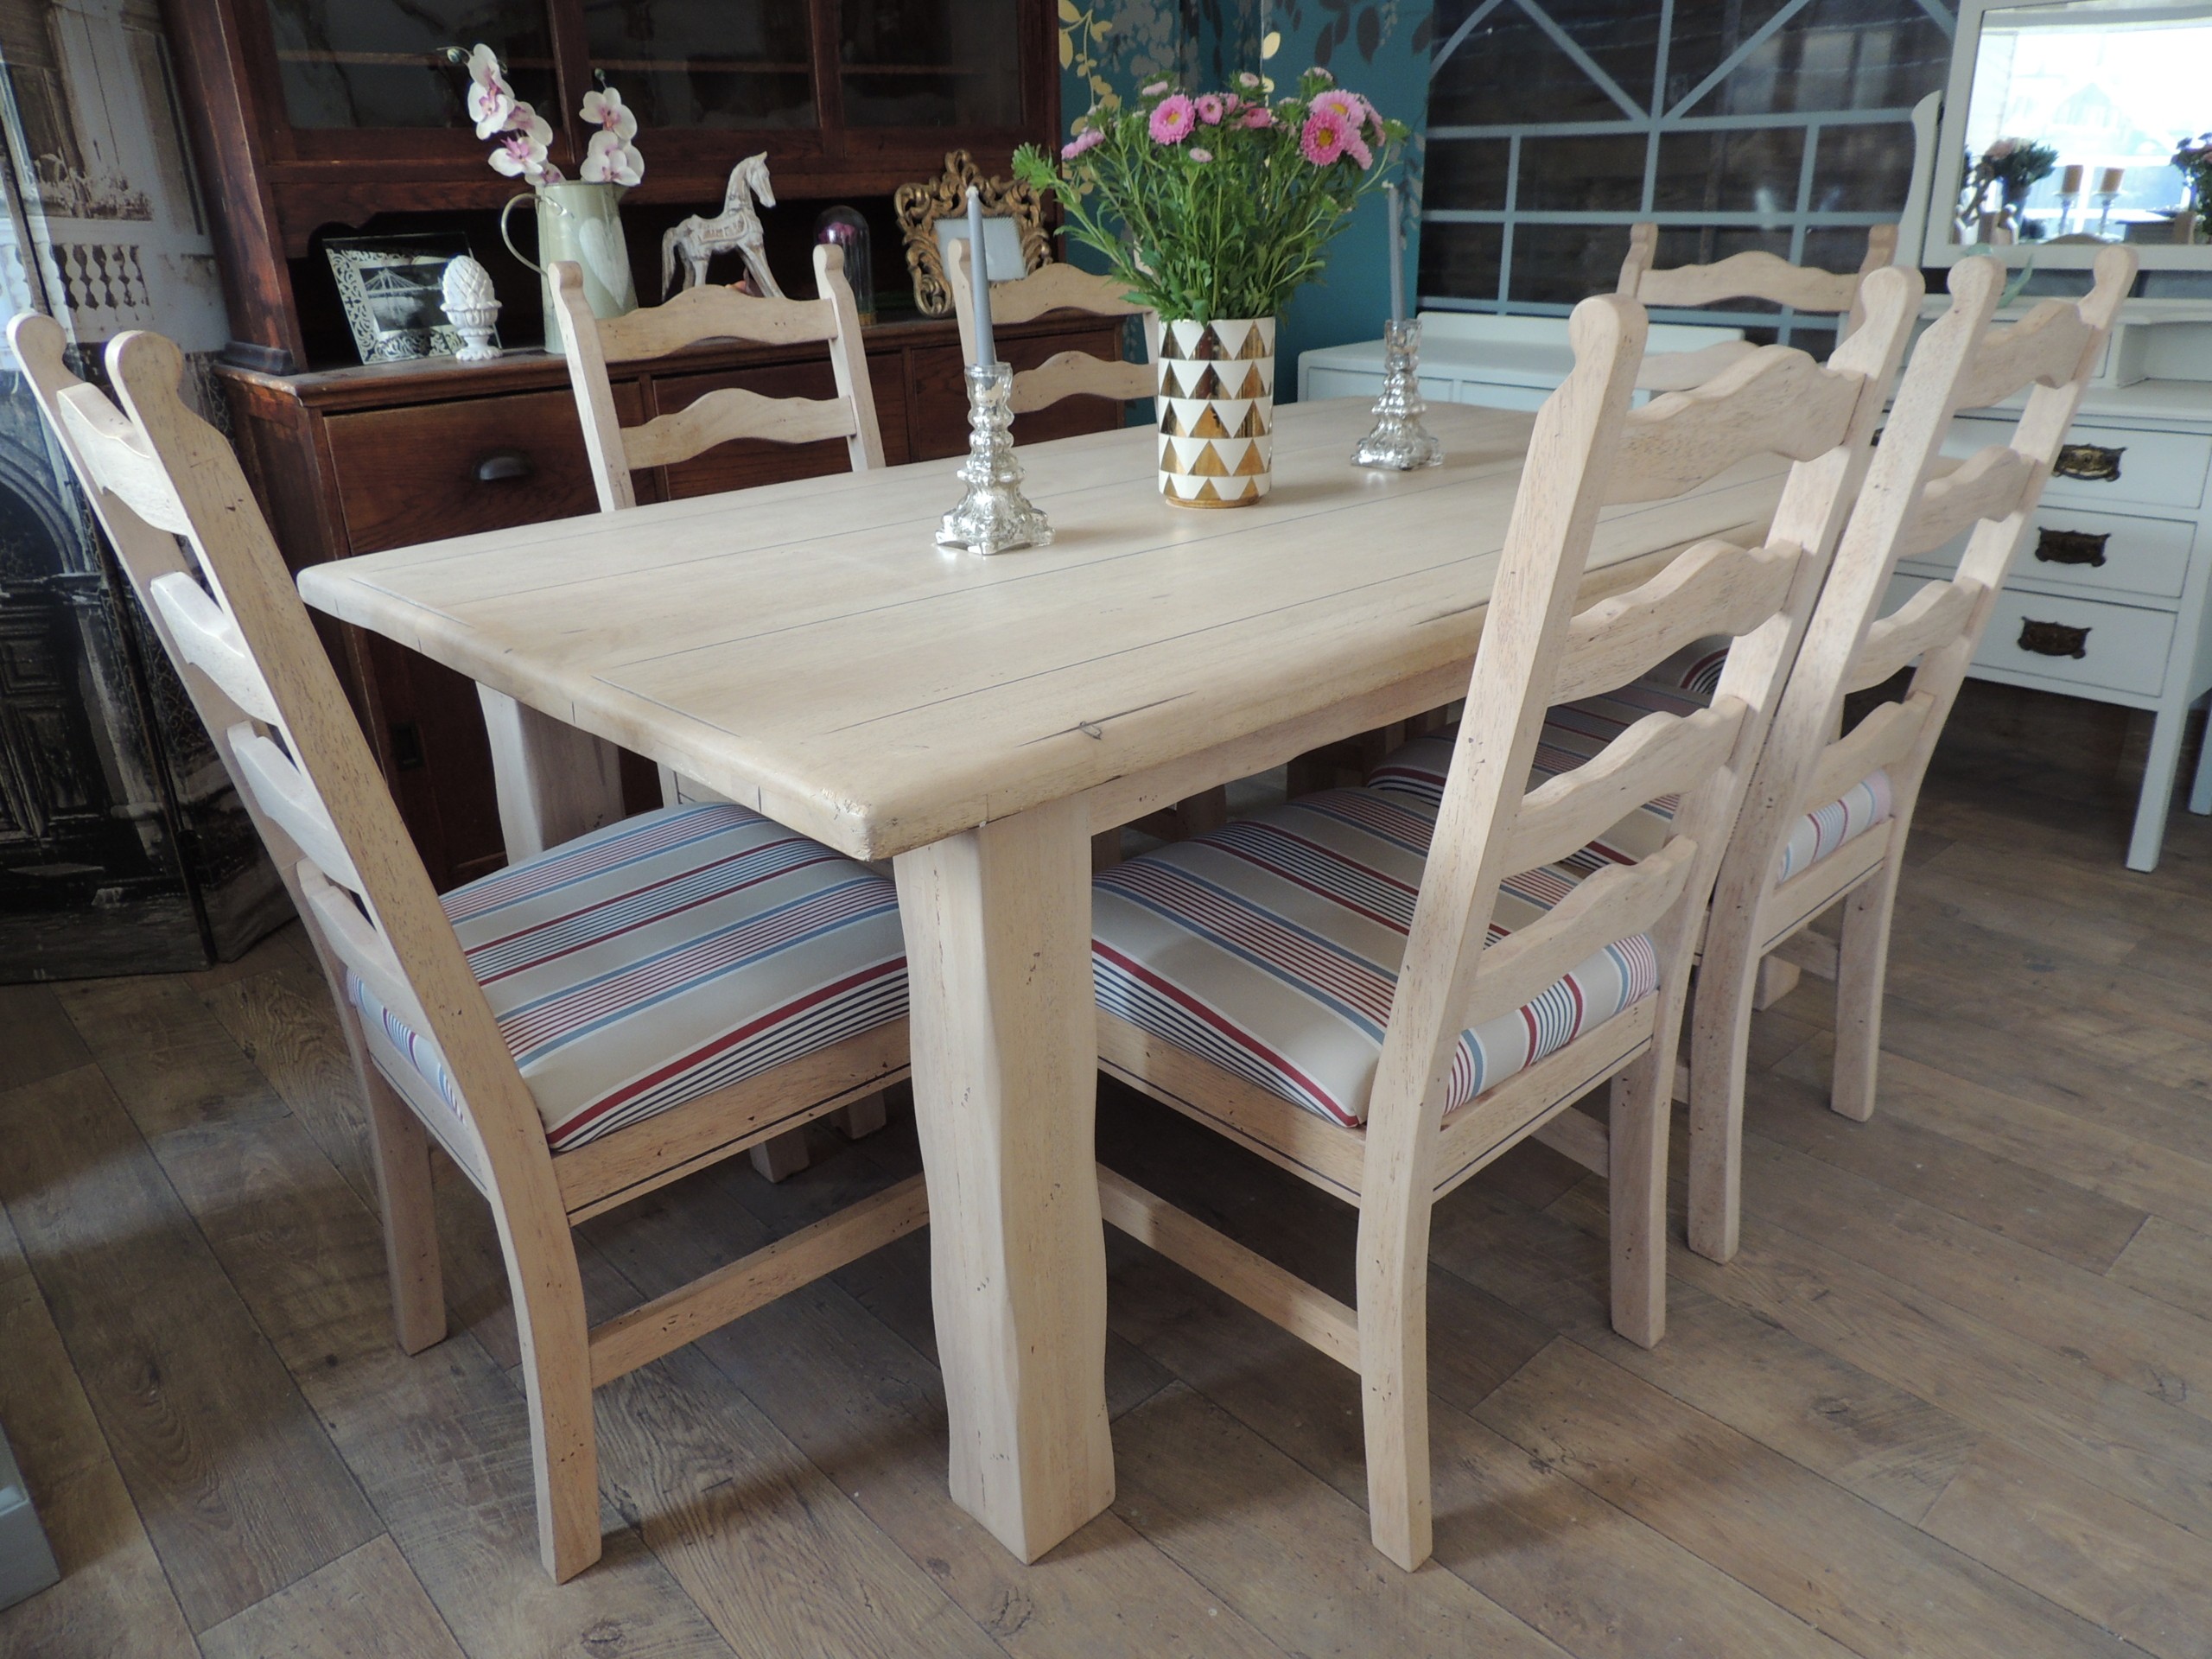 Lovely rustic farmhouse style dining table with six chairs